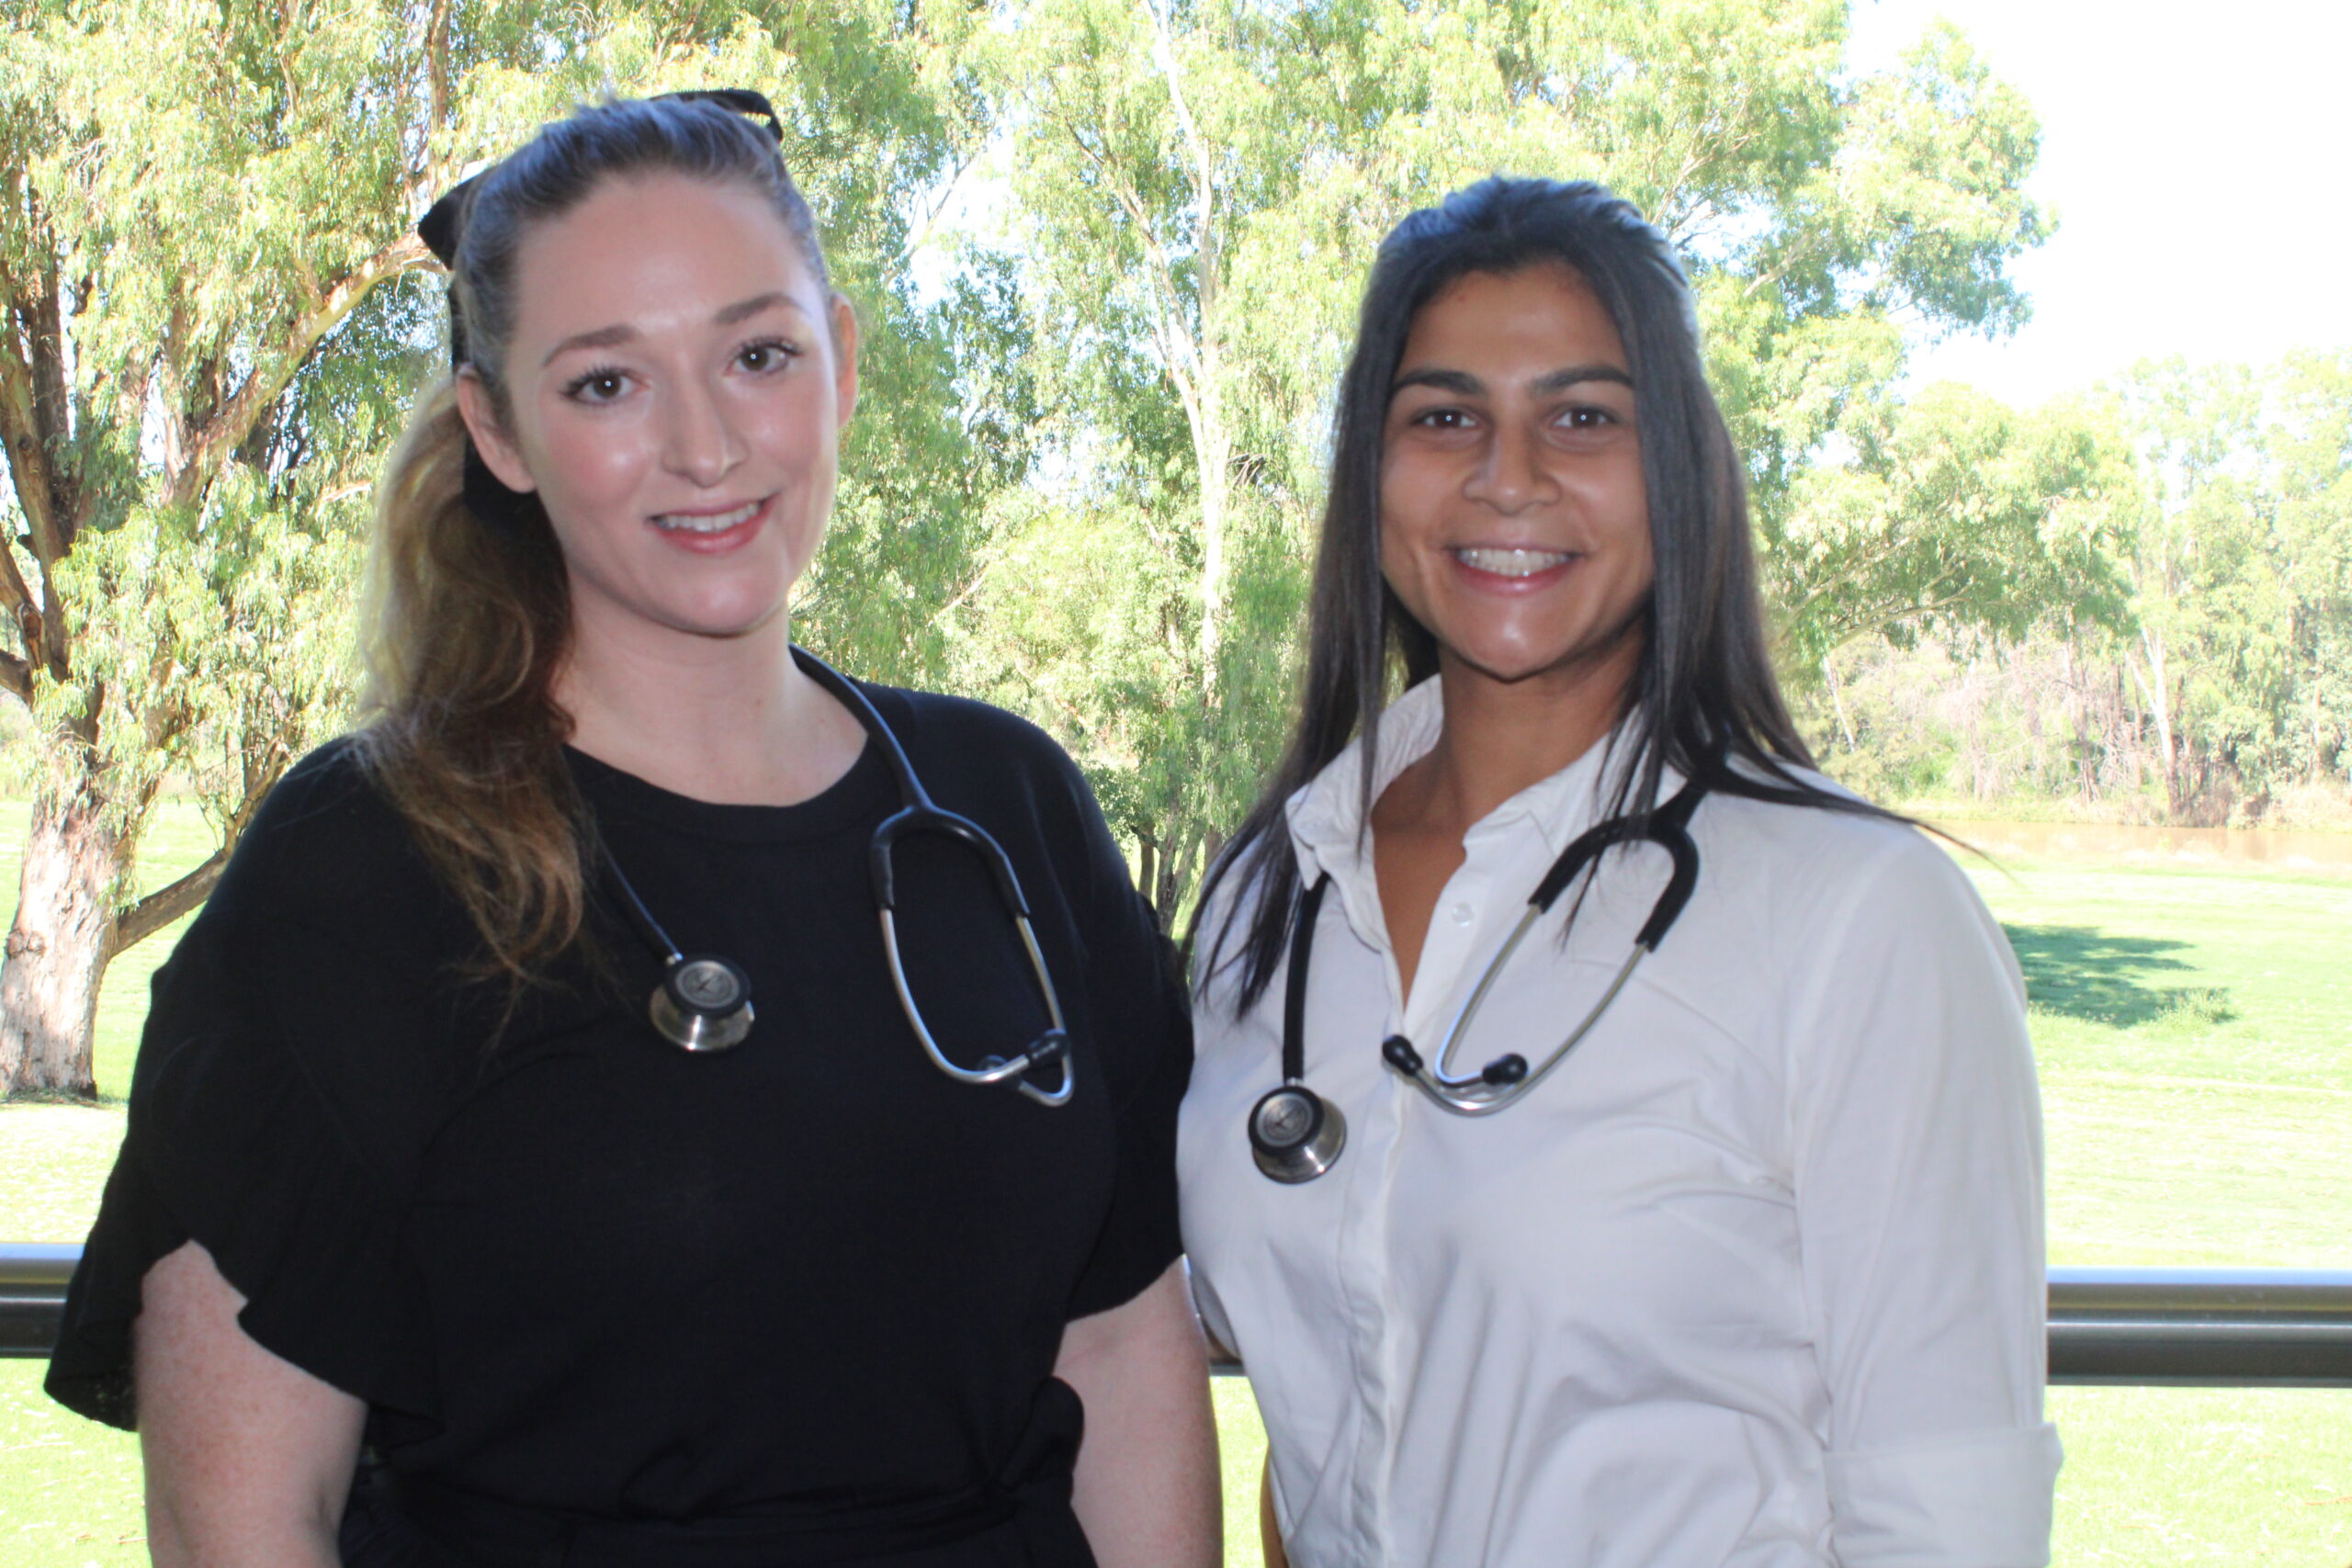 Medical students complete rural placement in Narrabri